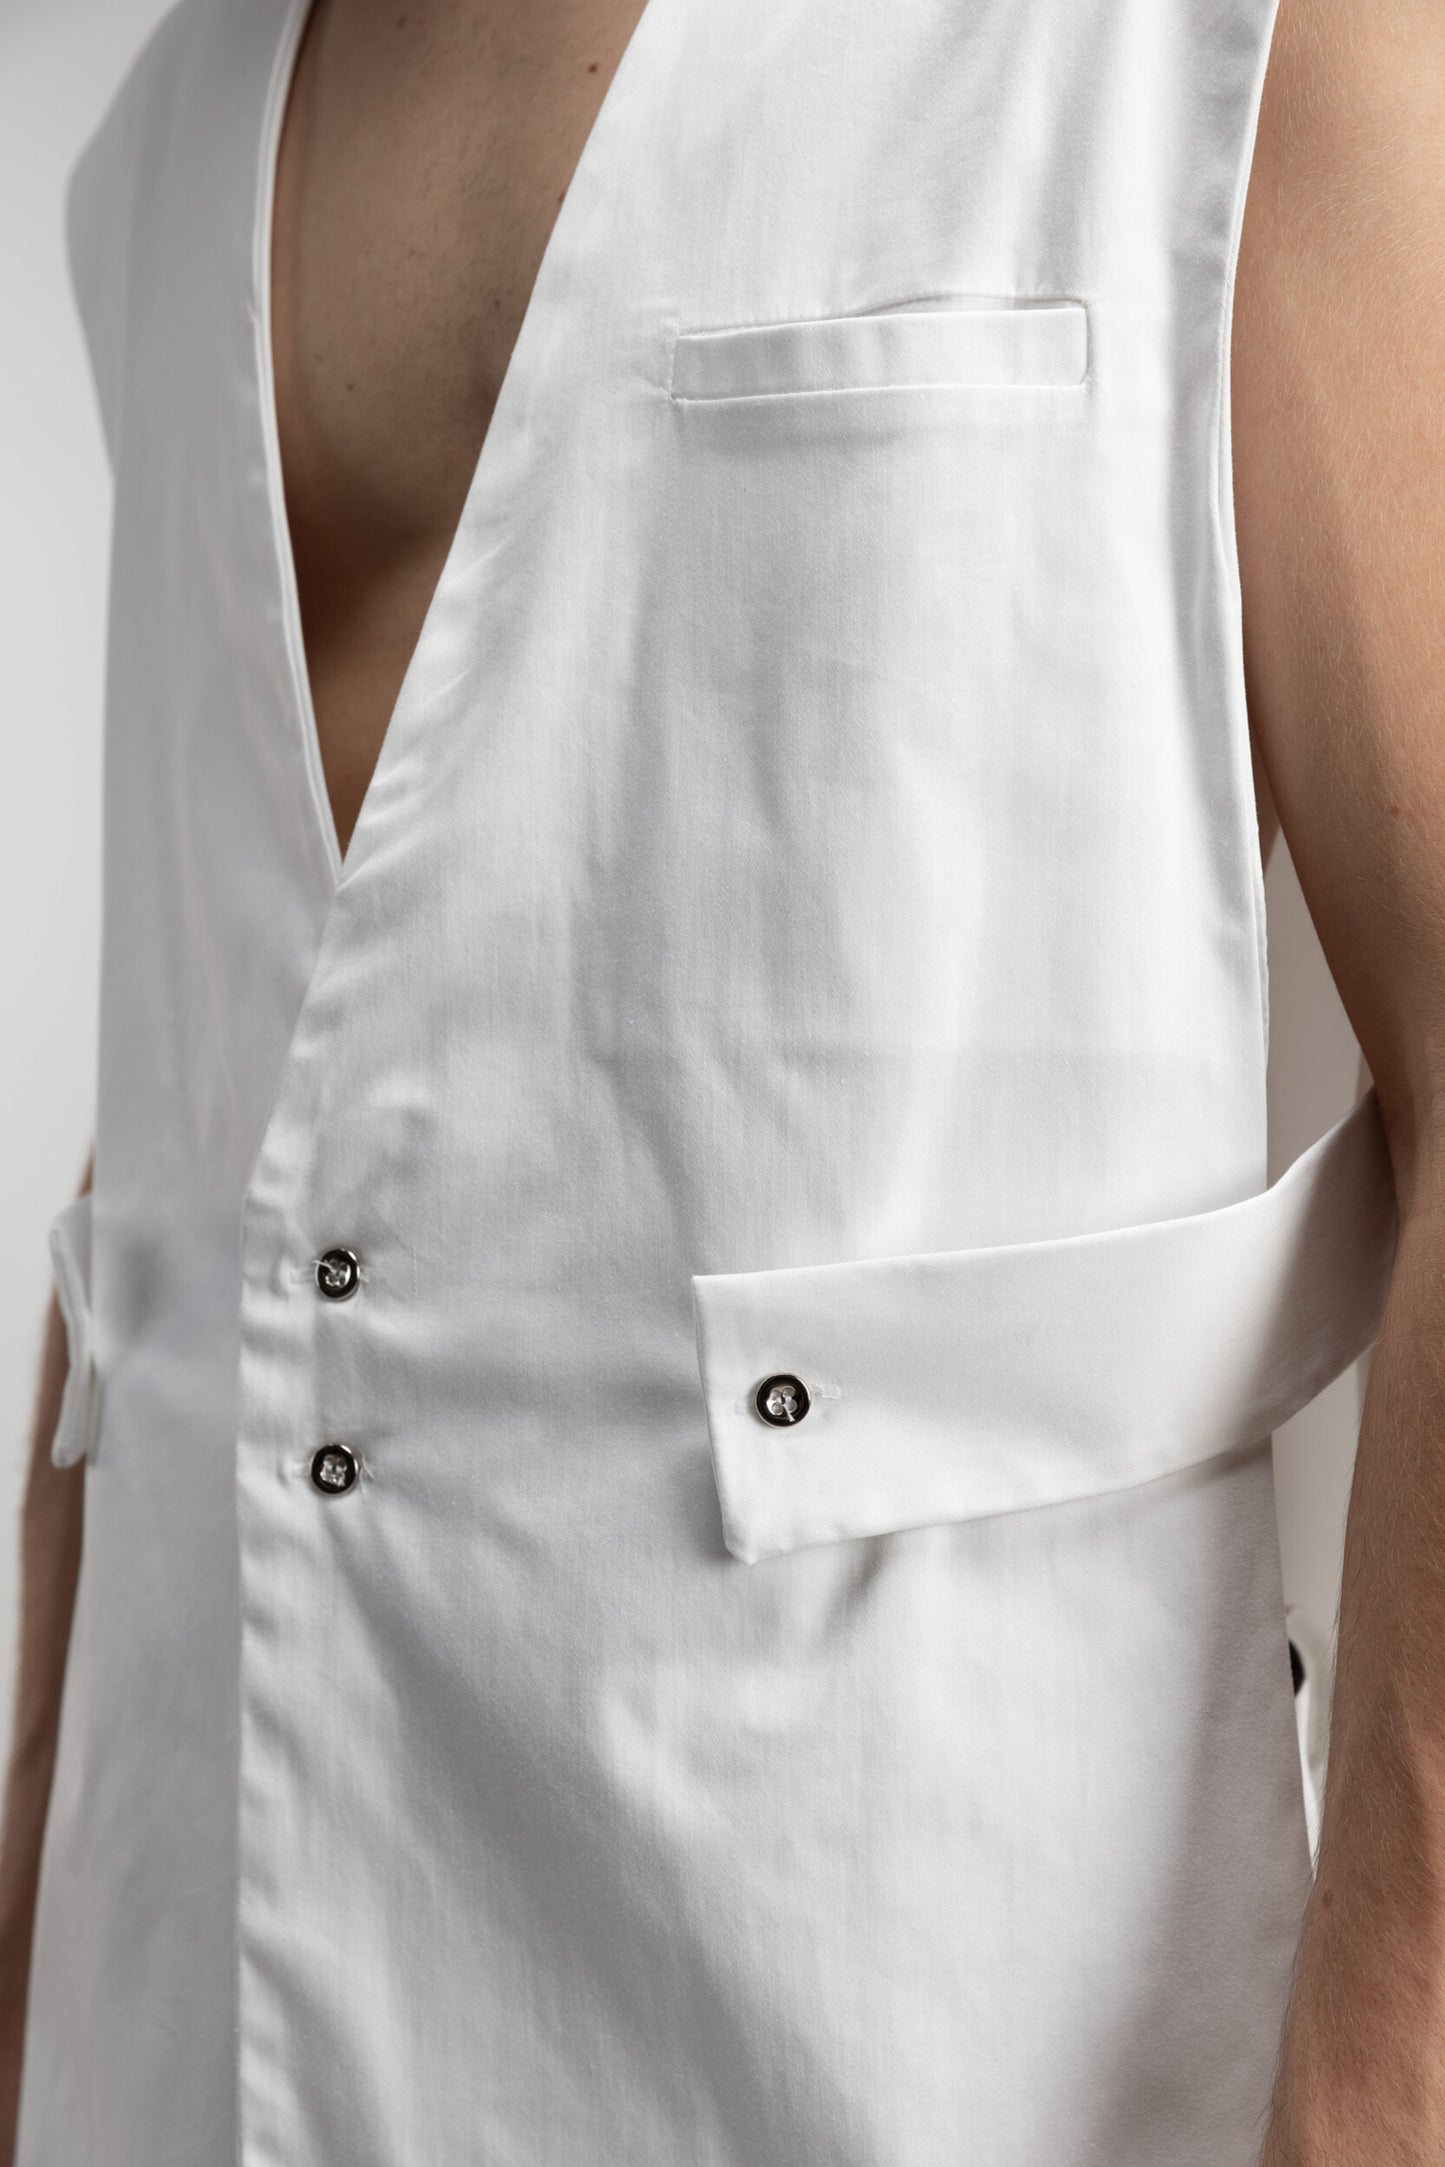 Sleeveless vest with side openings